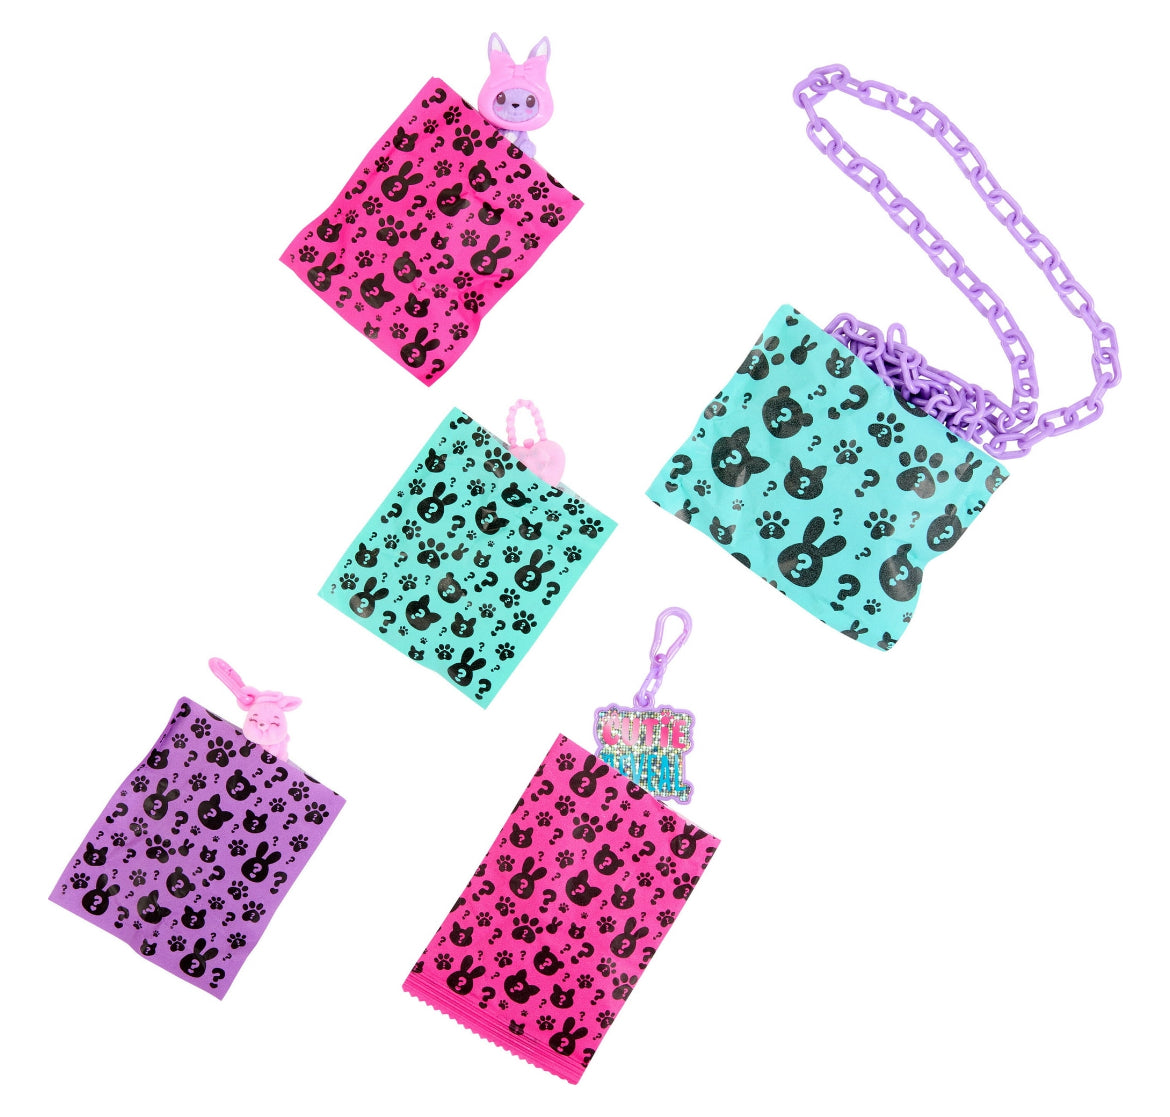 Barbie Cutie Reveal Purse Collection with 7 Surprises Including Mini Pet (Styles May Vary)